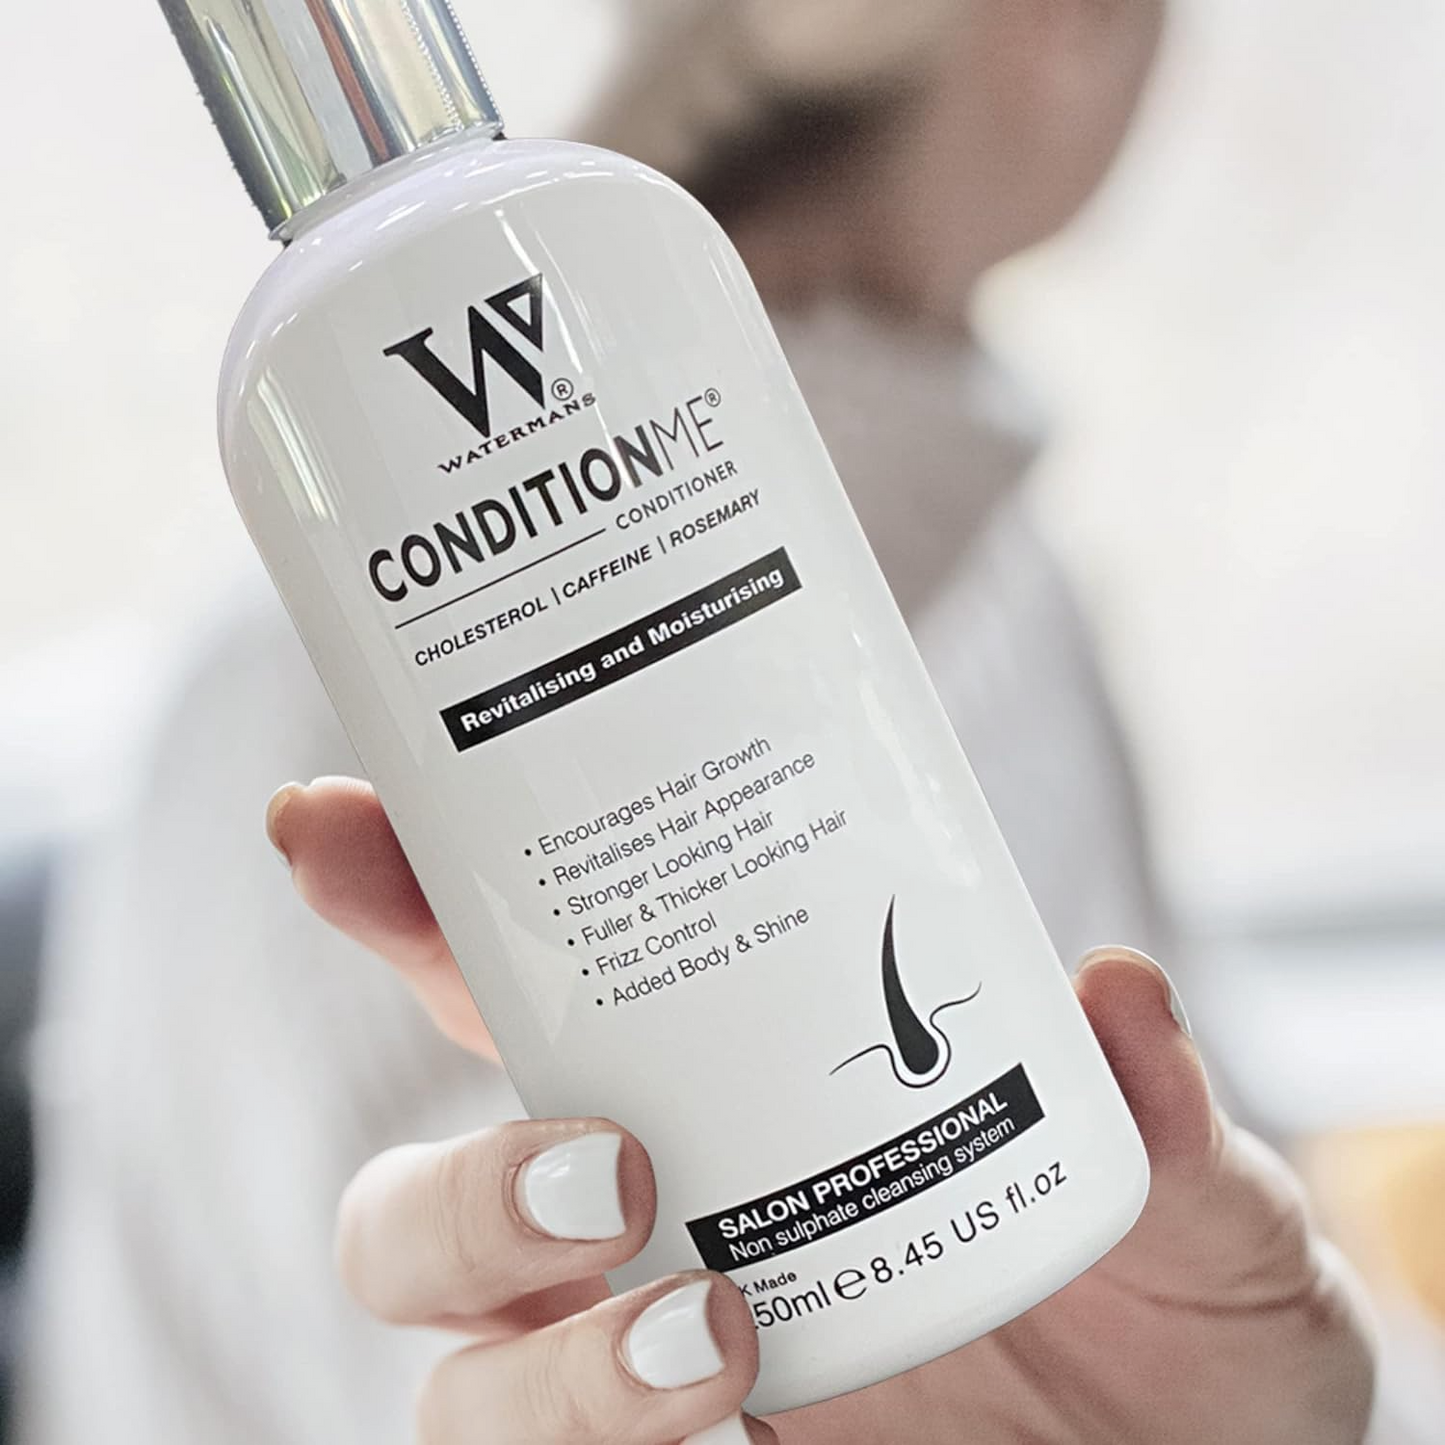 Condition Me Conditioner - Growth, Strengthening, Deep hydration, Boosts Volume